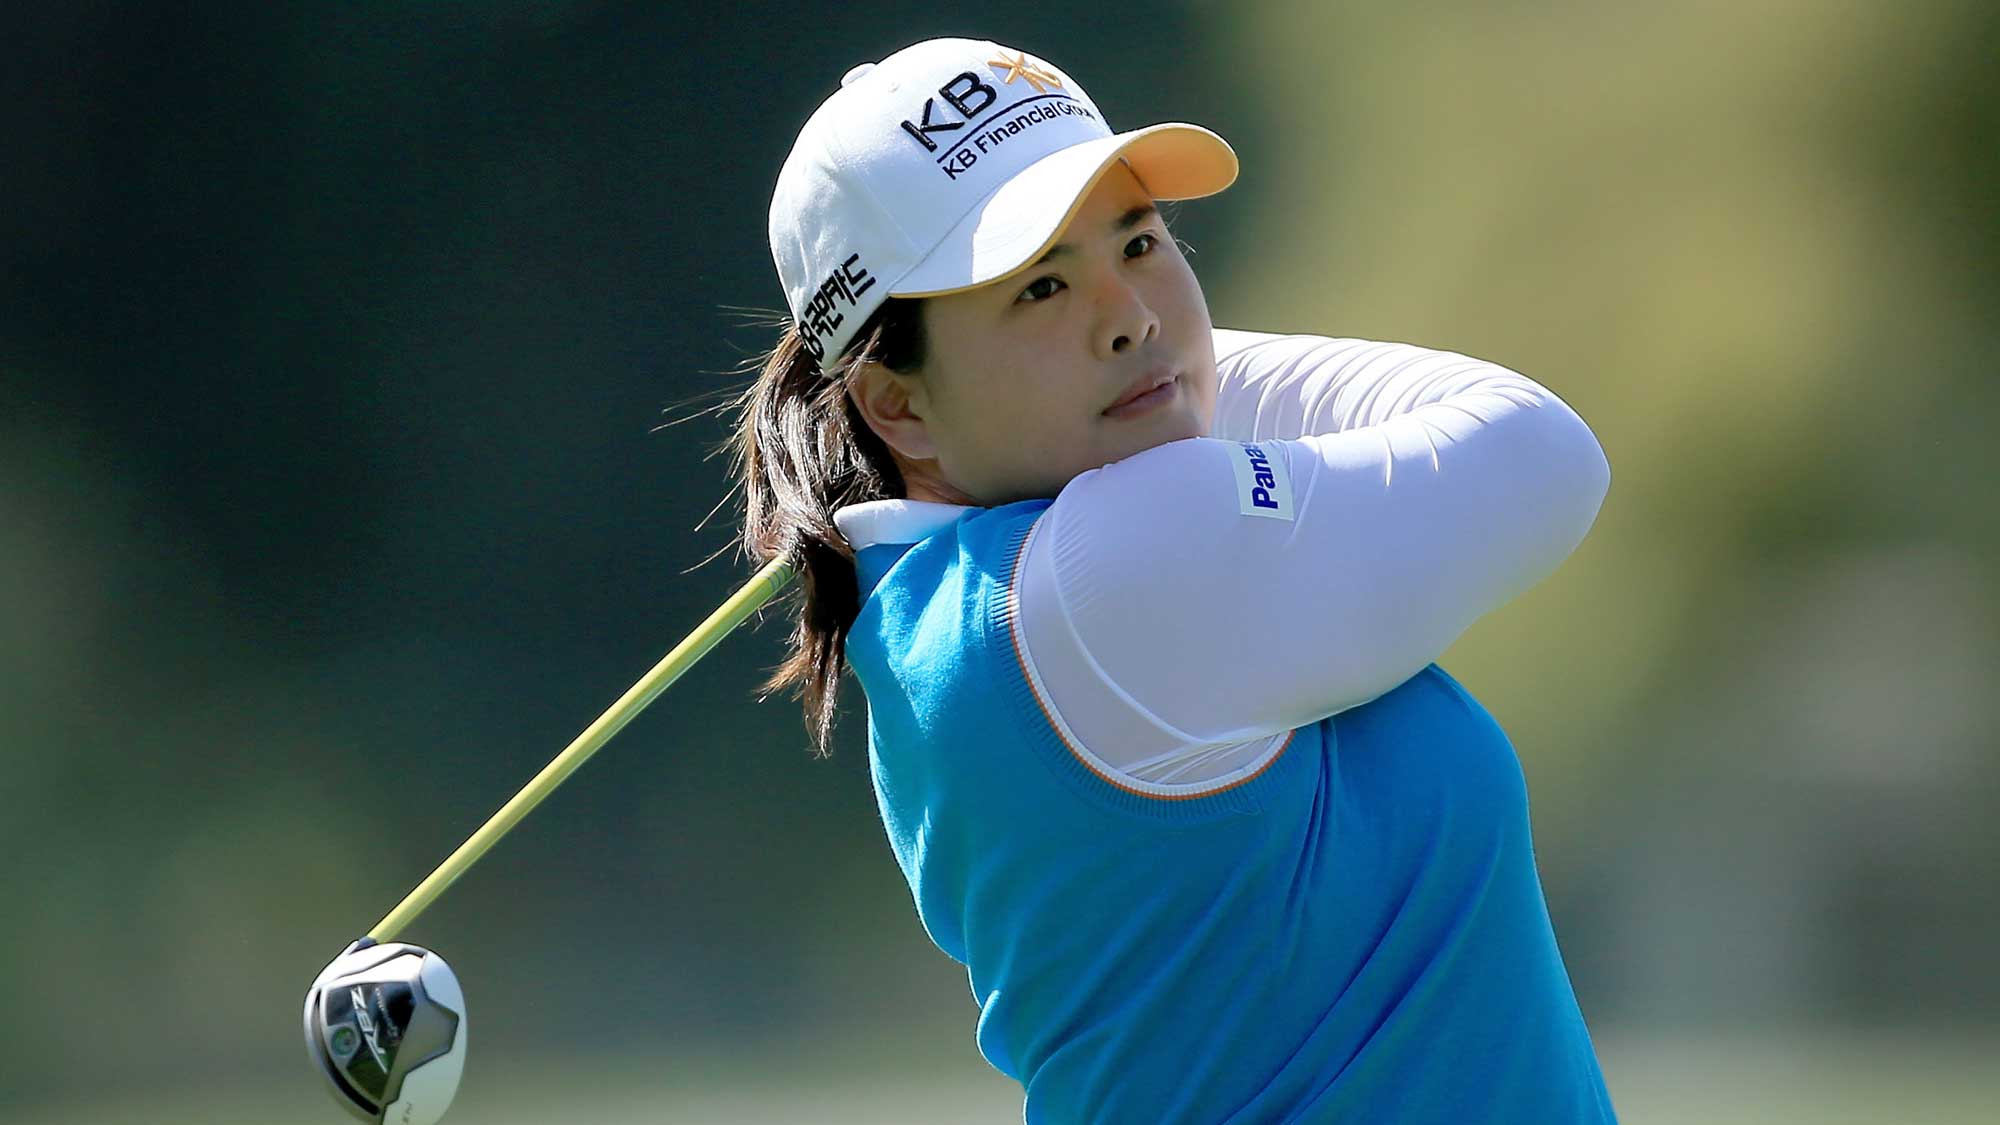 What does Park want to accomplish in the game? | LPGA | Ladies ...